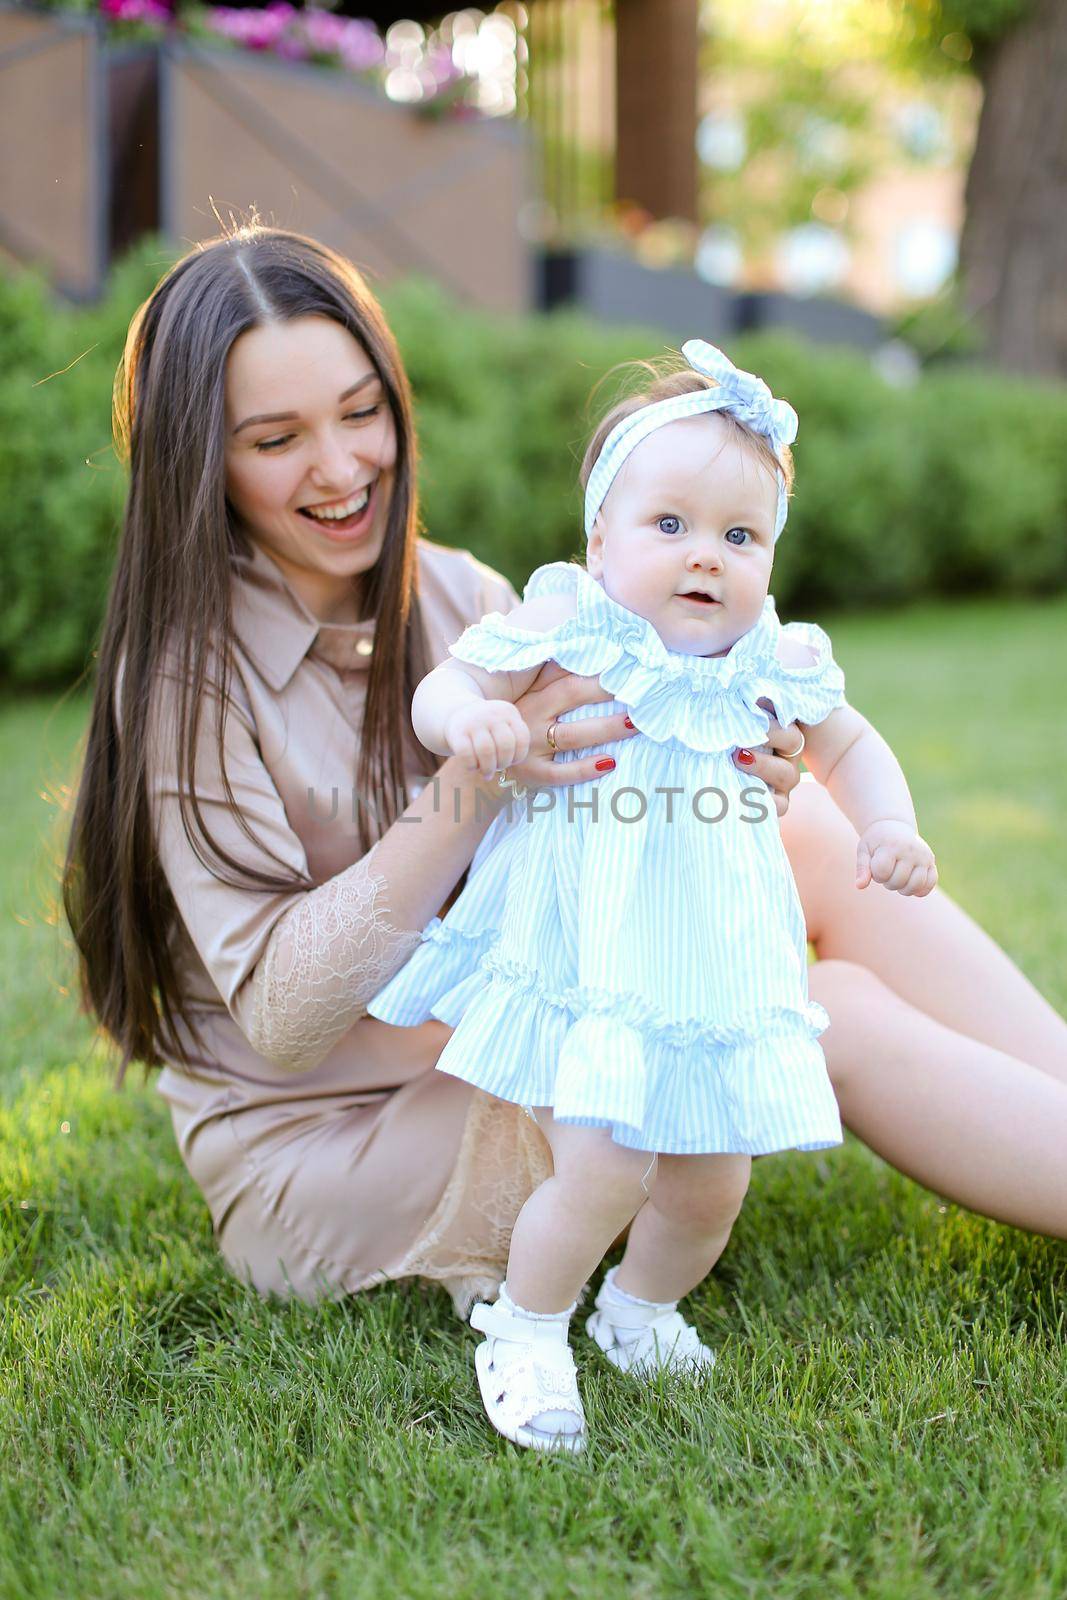 Young smiling woman sitting on grass with little female baby. Concept of motherhood and children, resting on open air.